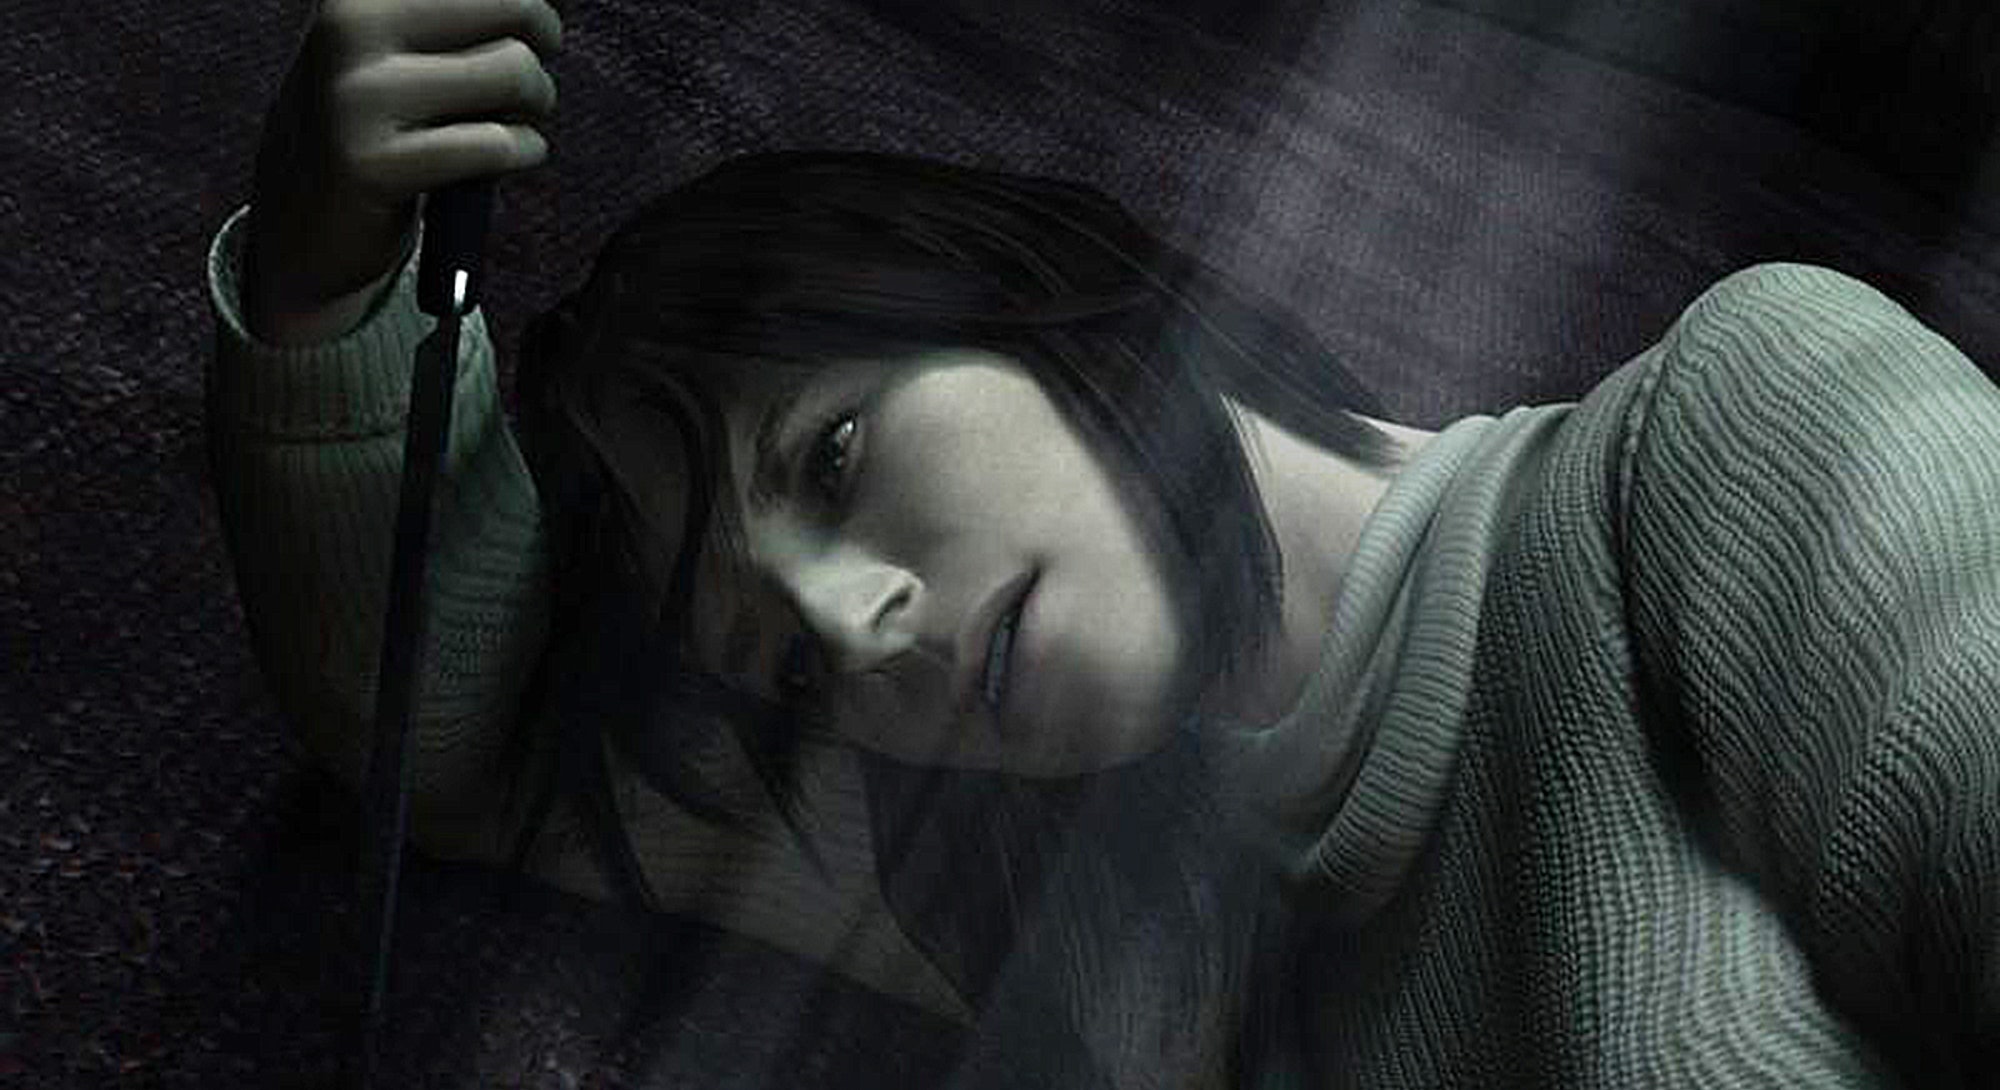 Angela lying down, holding a knife above her face